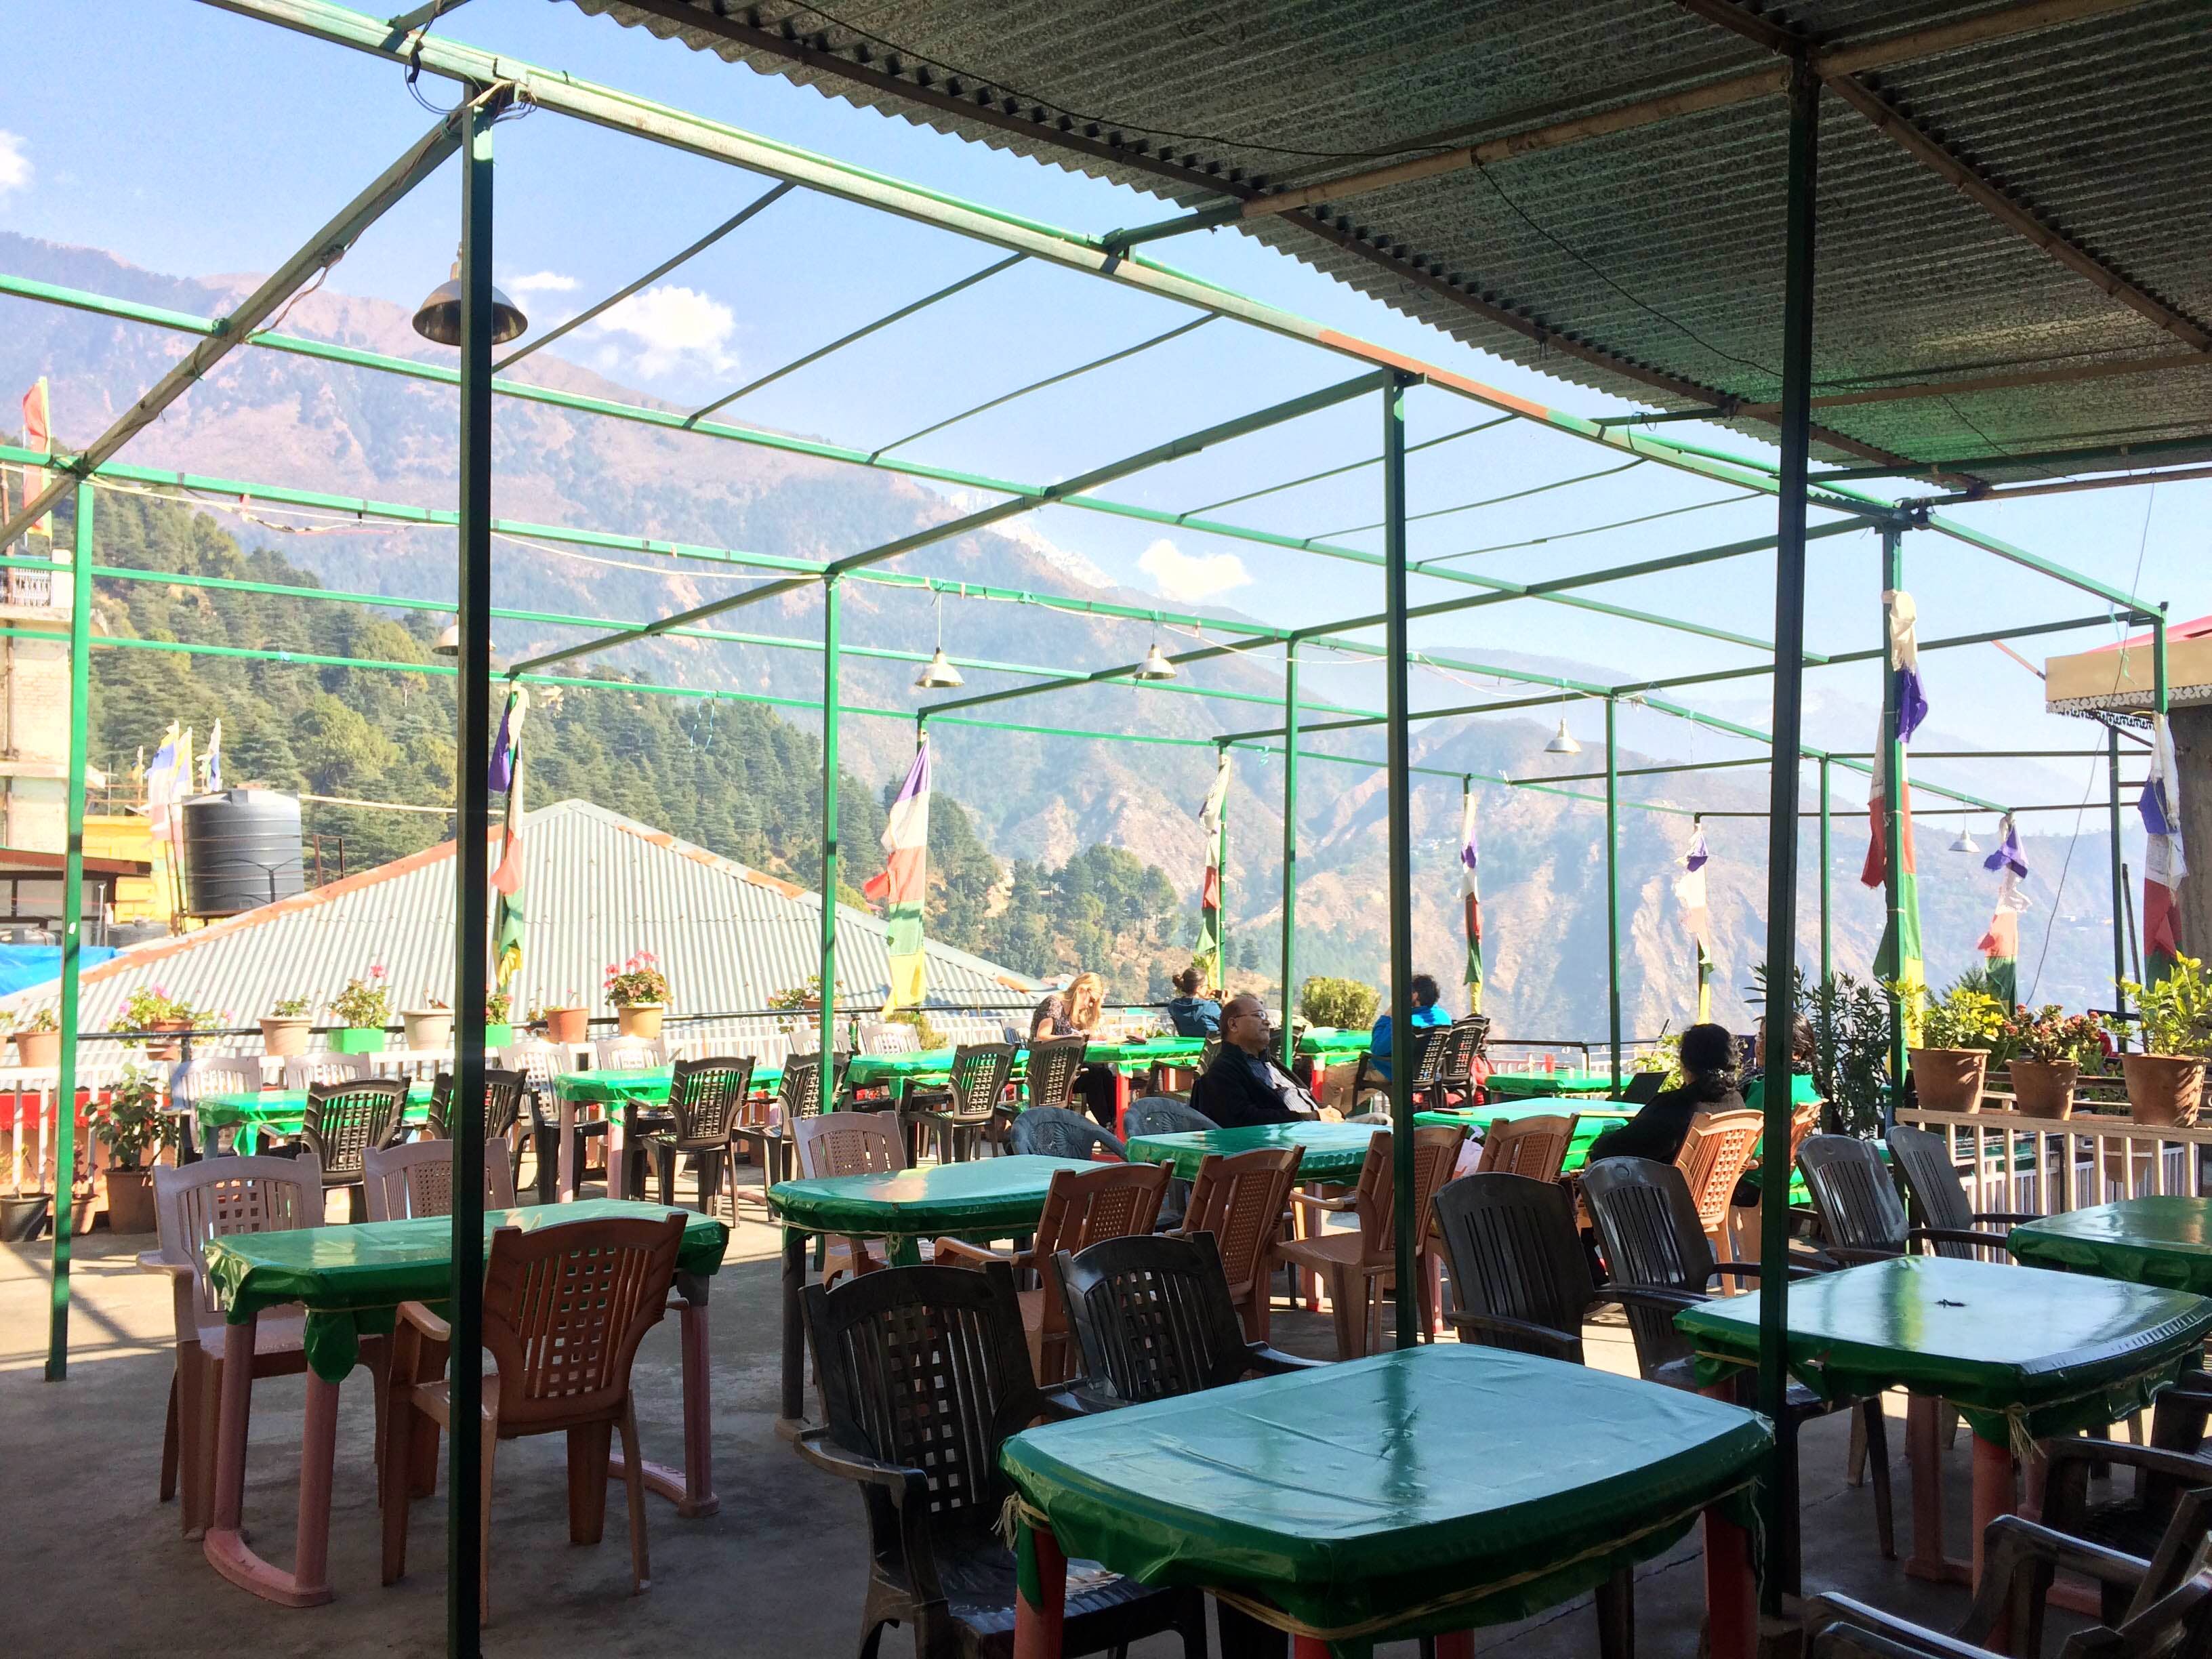 #GetLost In The Beauty Of The Mountains As You Enjoy Breakfast At This Cafe In Mcleodganj